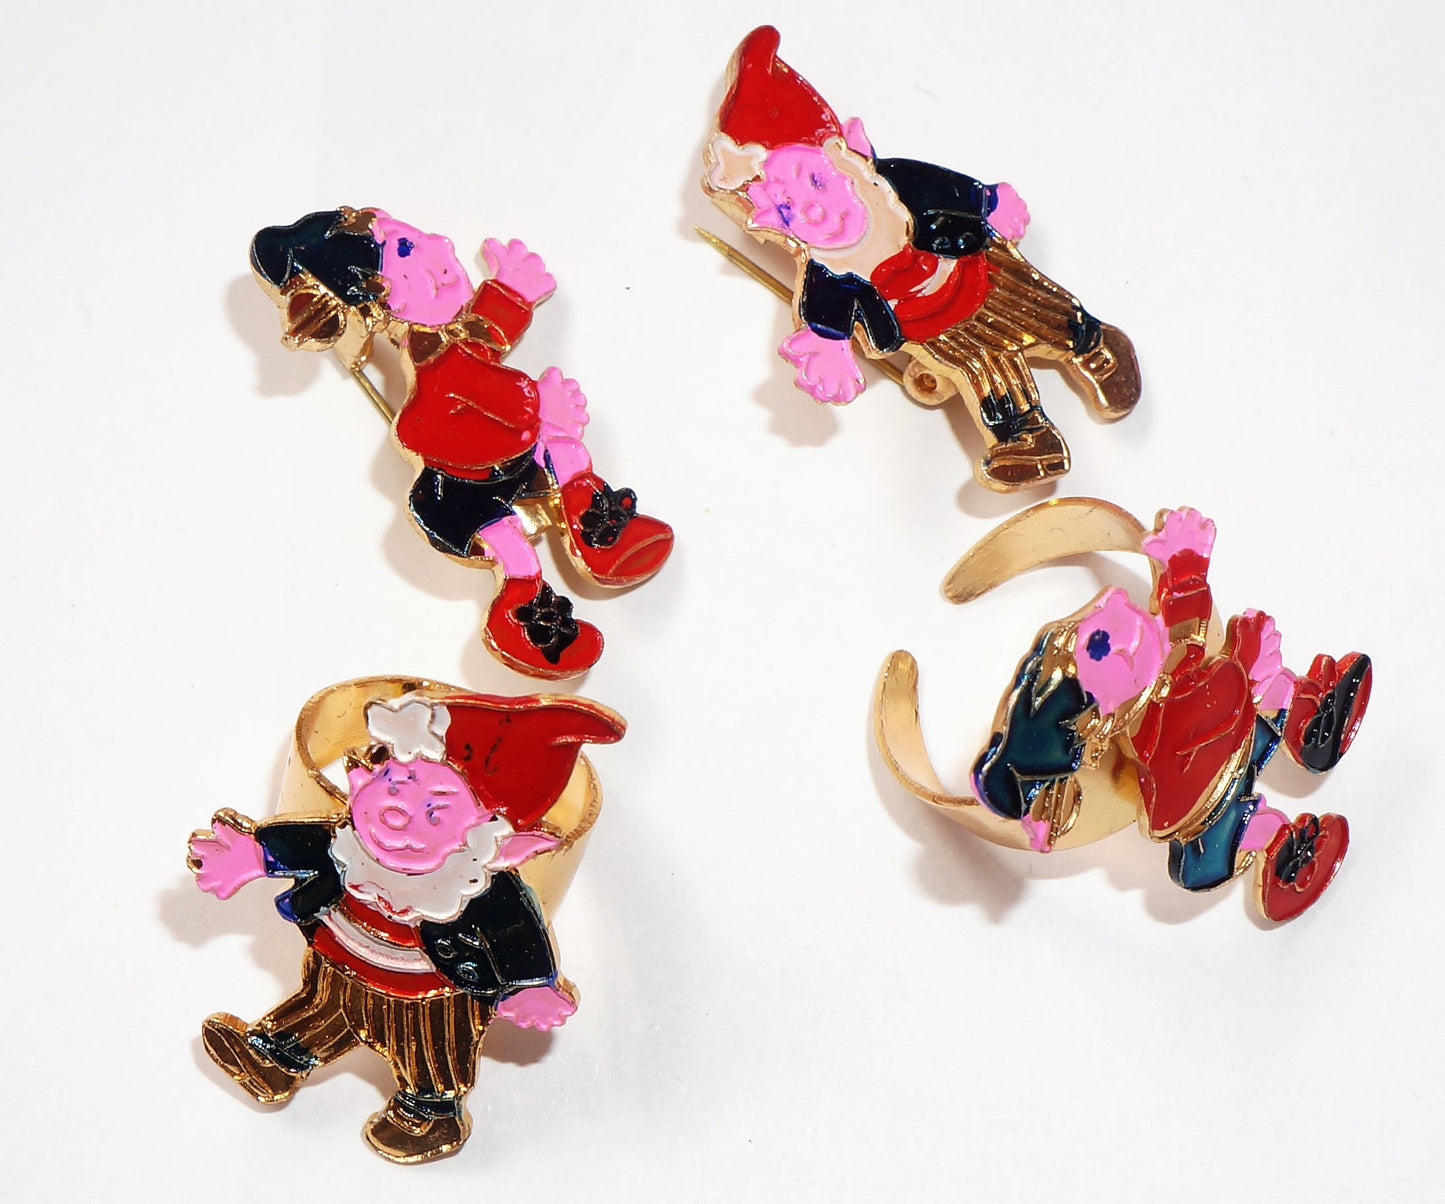 Vintage 1975 Edco Series Noddy Broches & Rings Set - Including Noddy And Big Ears New Shop Stock Room Find Mint Condition